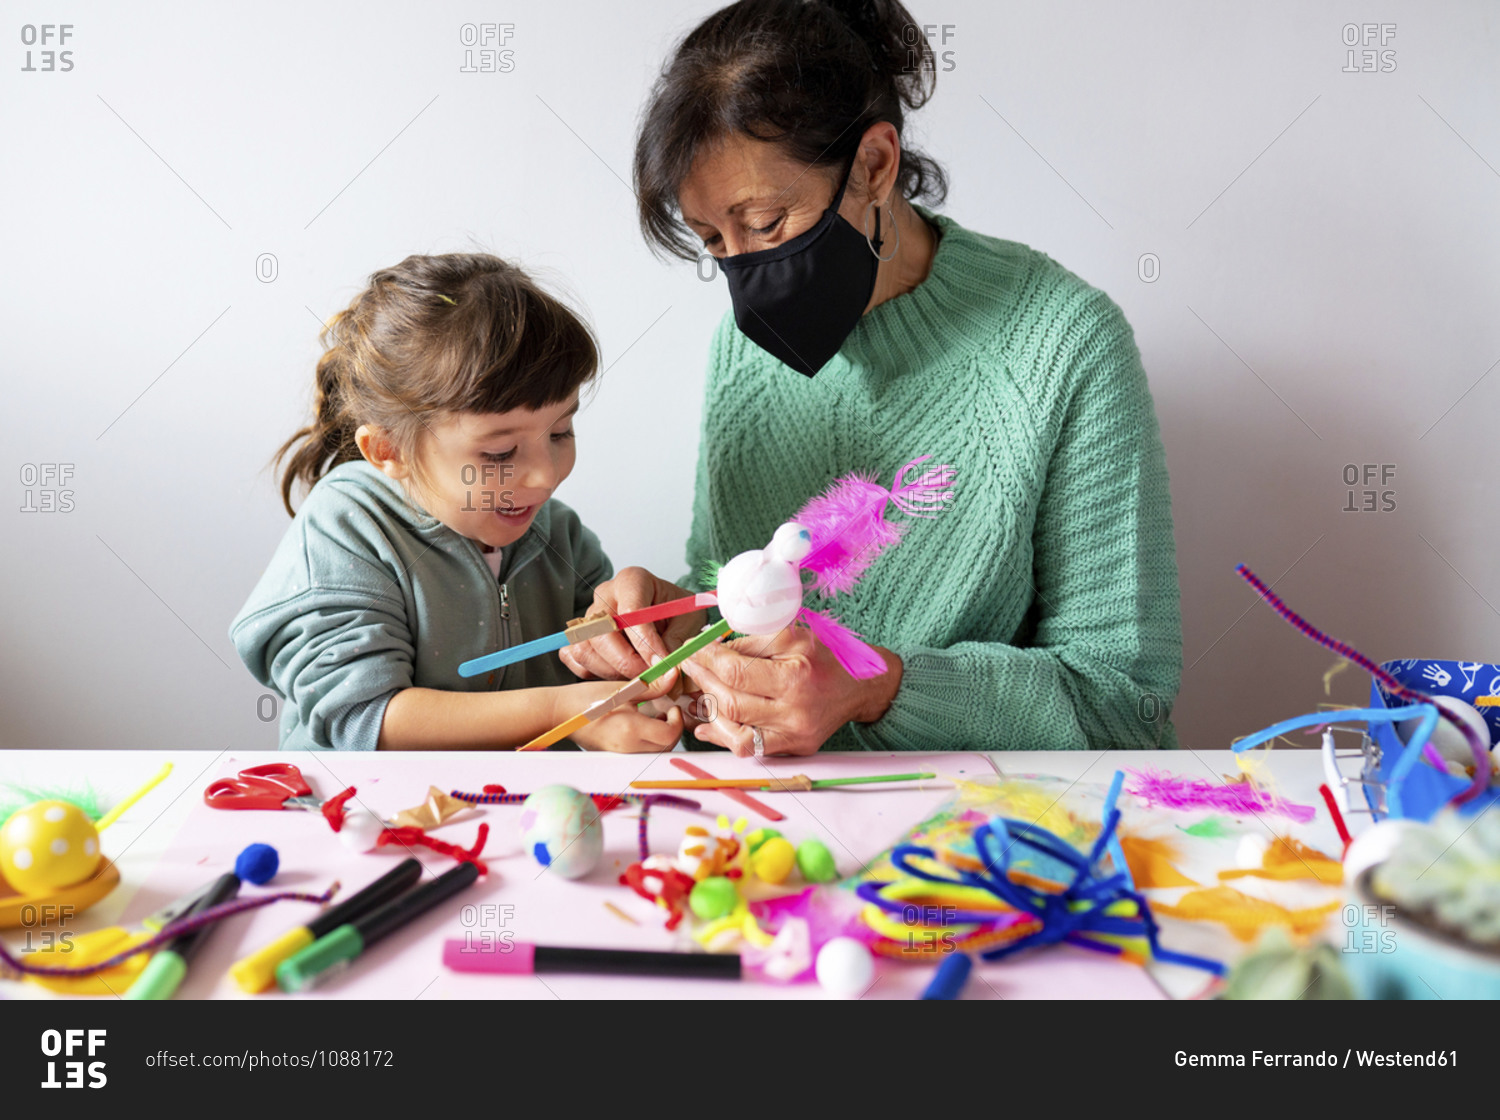 Grandmother and granddaughter making creative toys from pipe cleaners and pom-pom during COVID-19